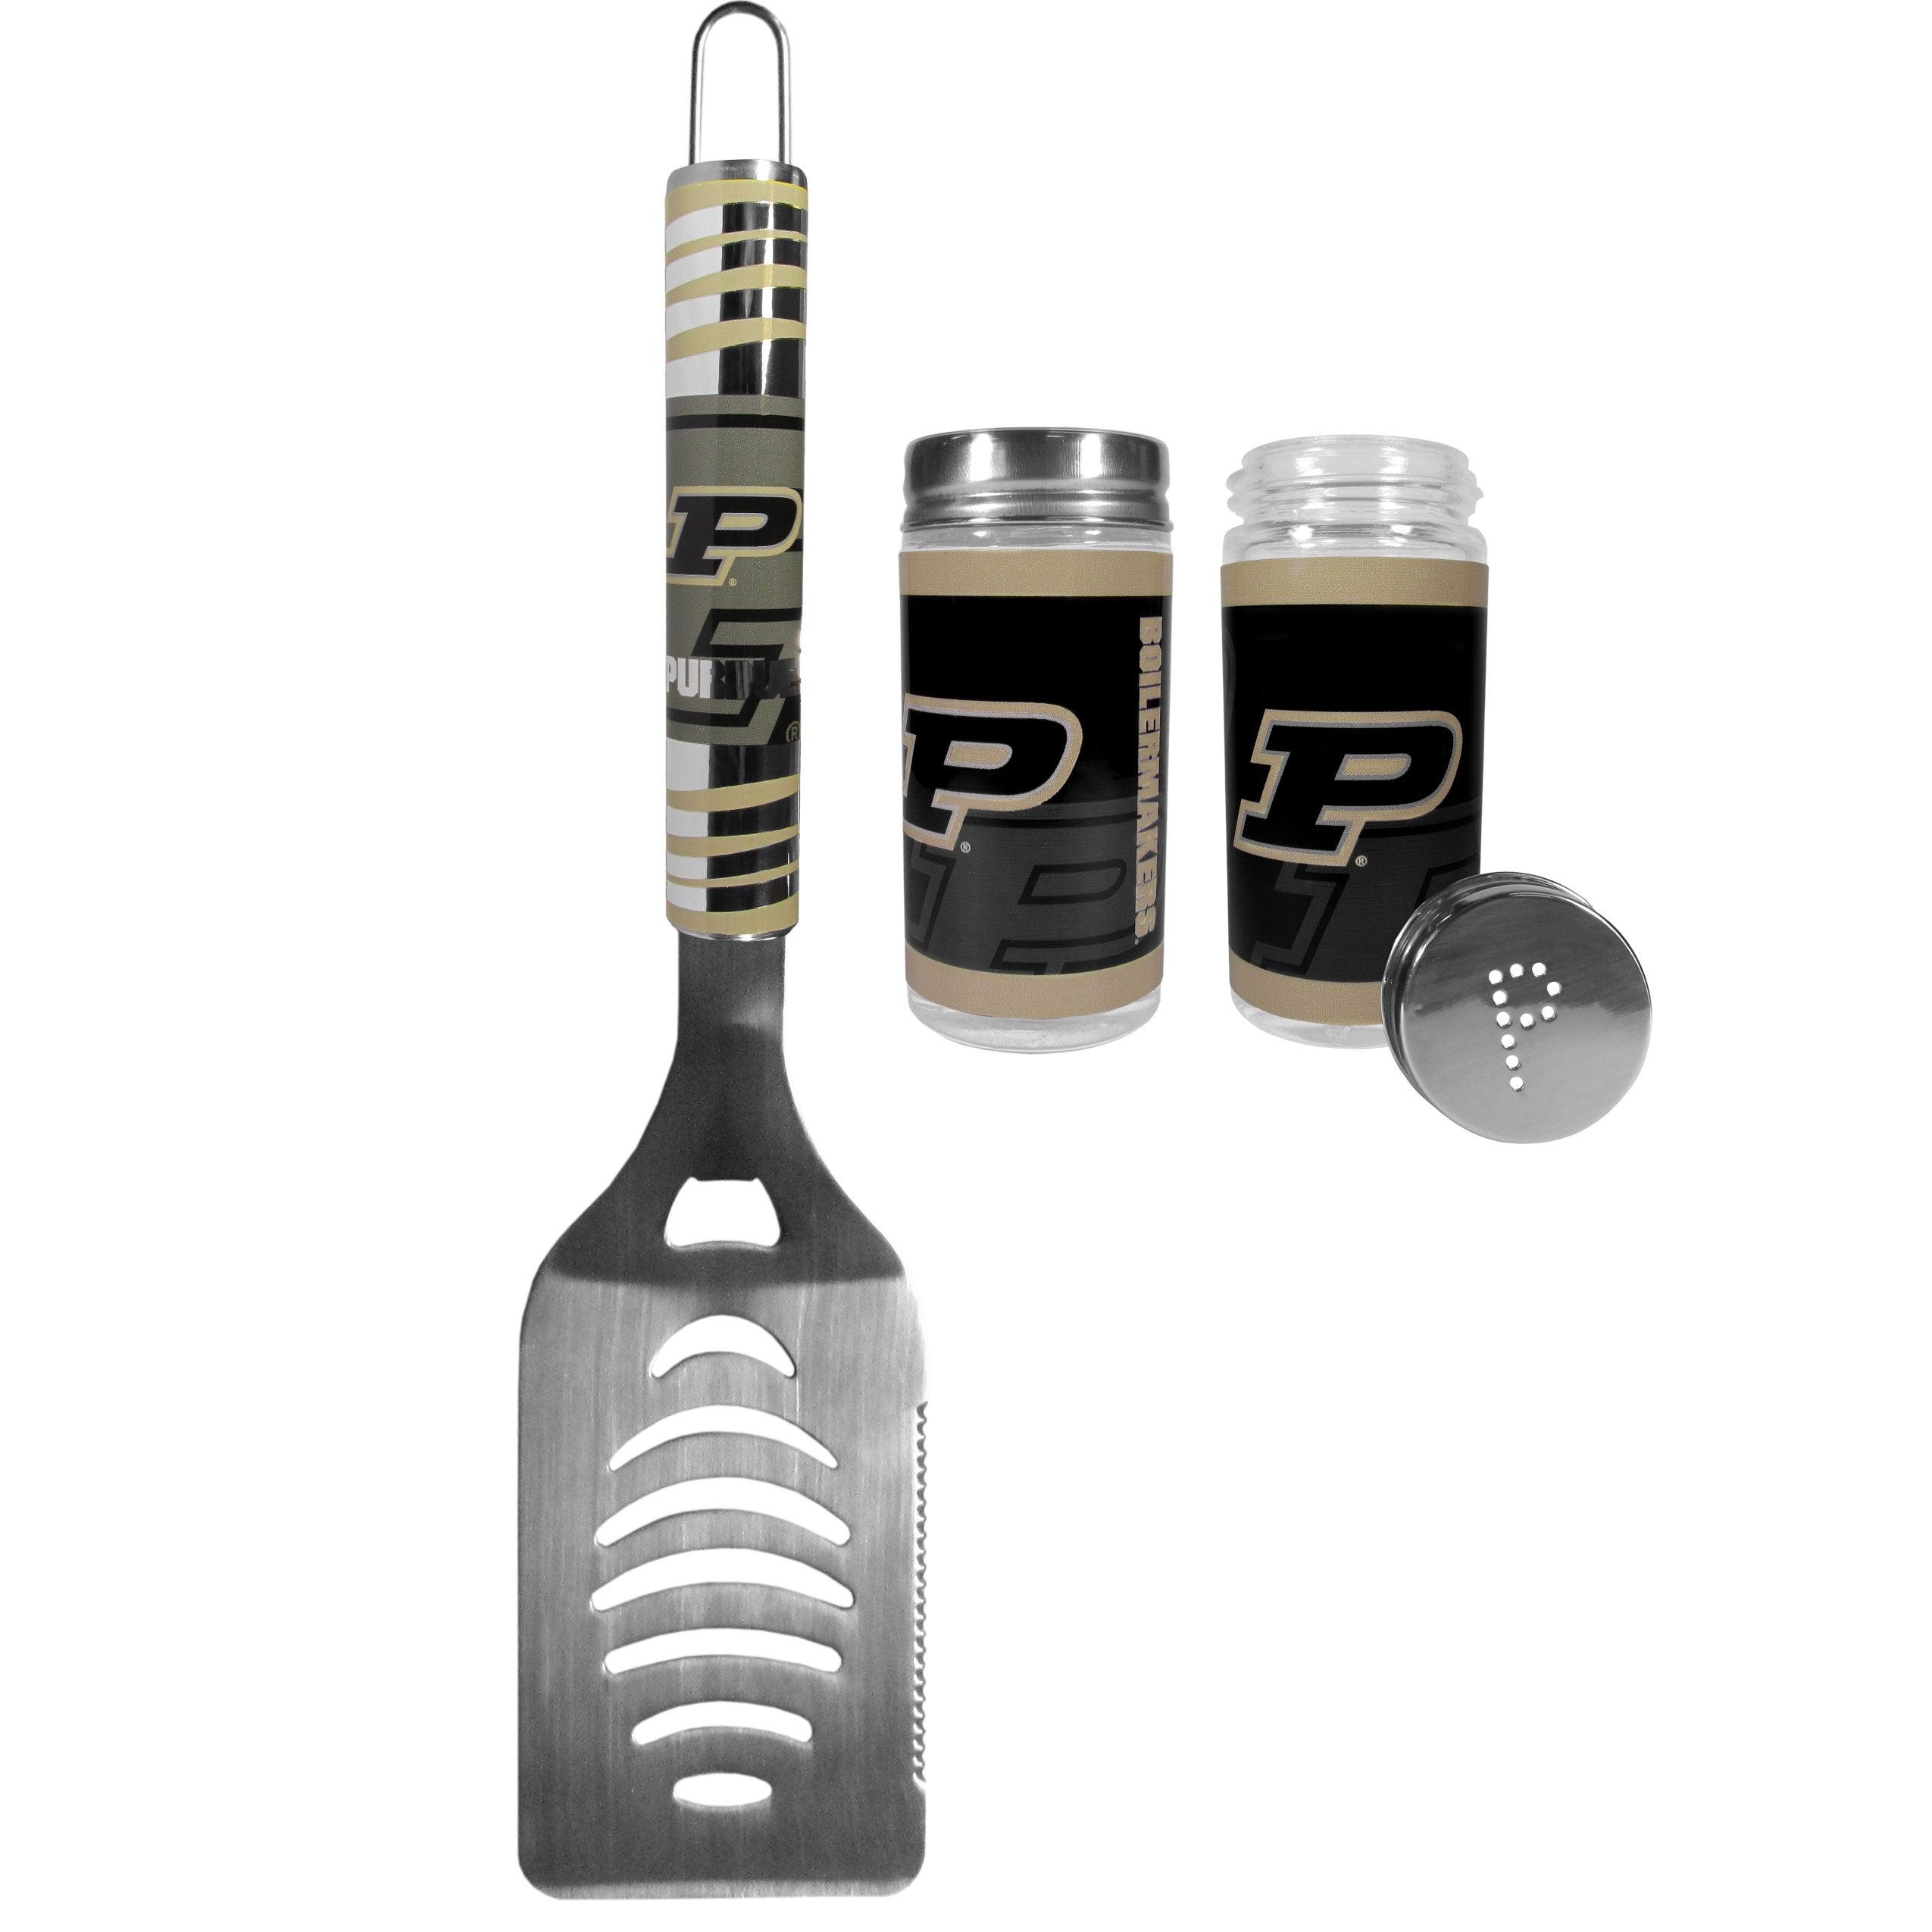 Purdue Boilermakers Tailgater Spatula and Salt and Pepper Shakers - Flyclothing LLC